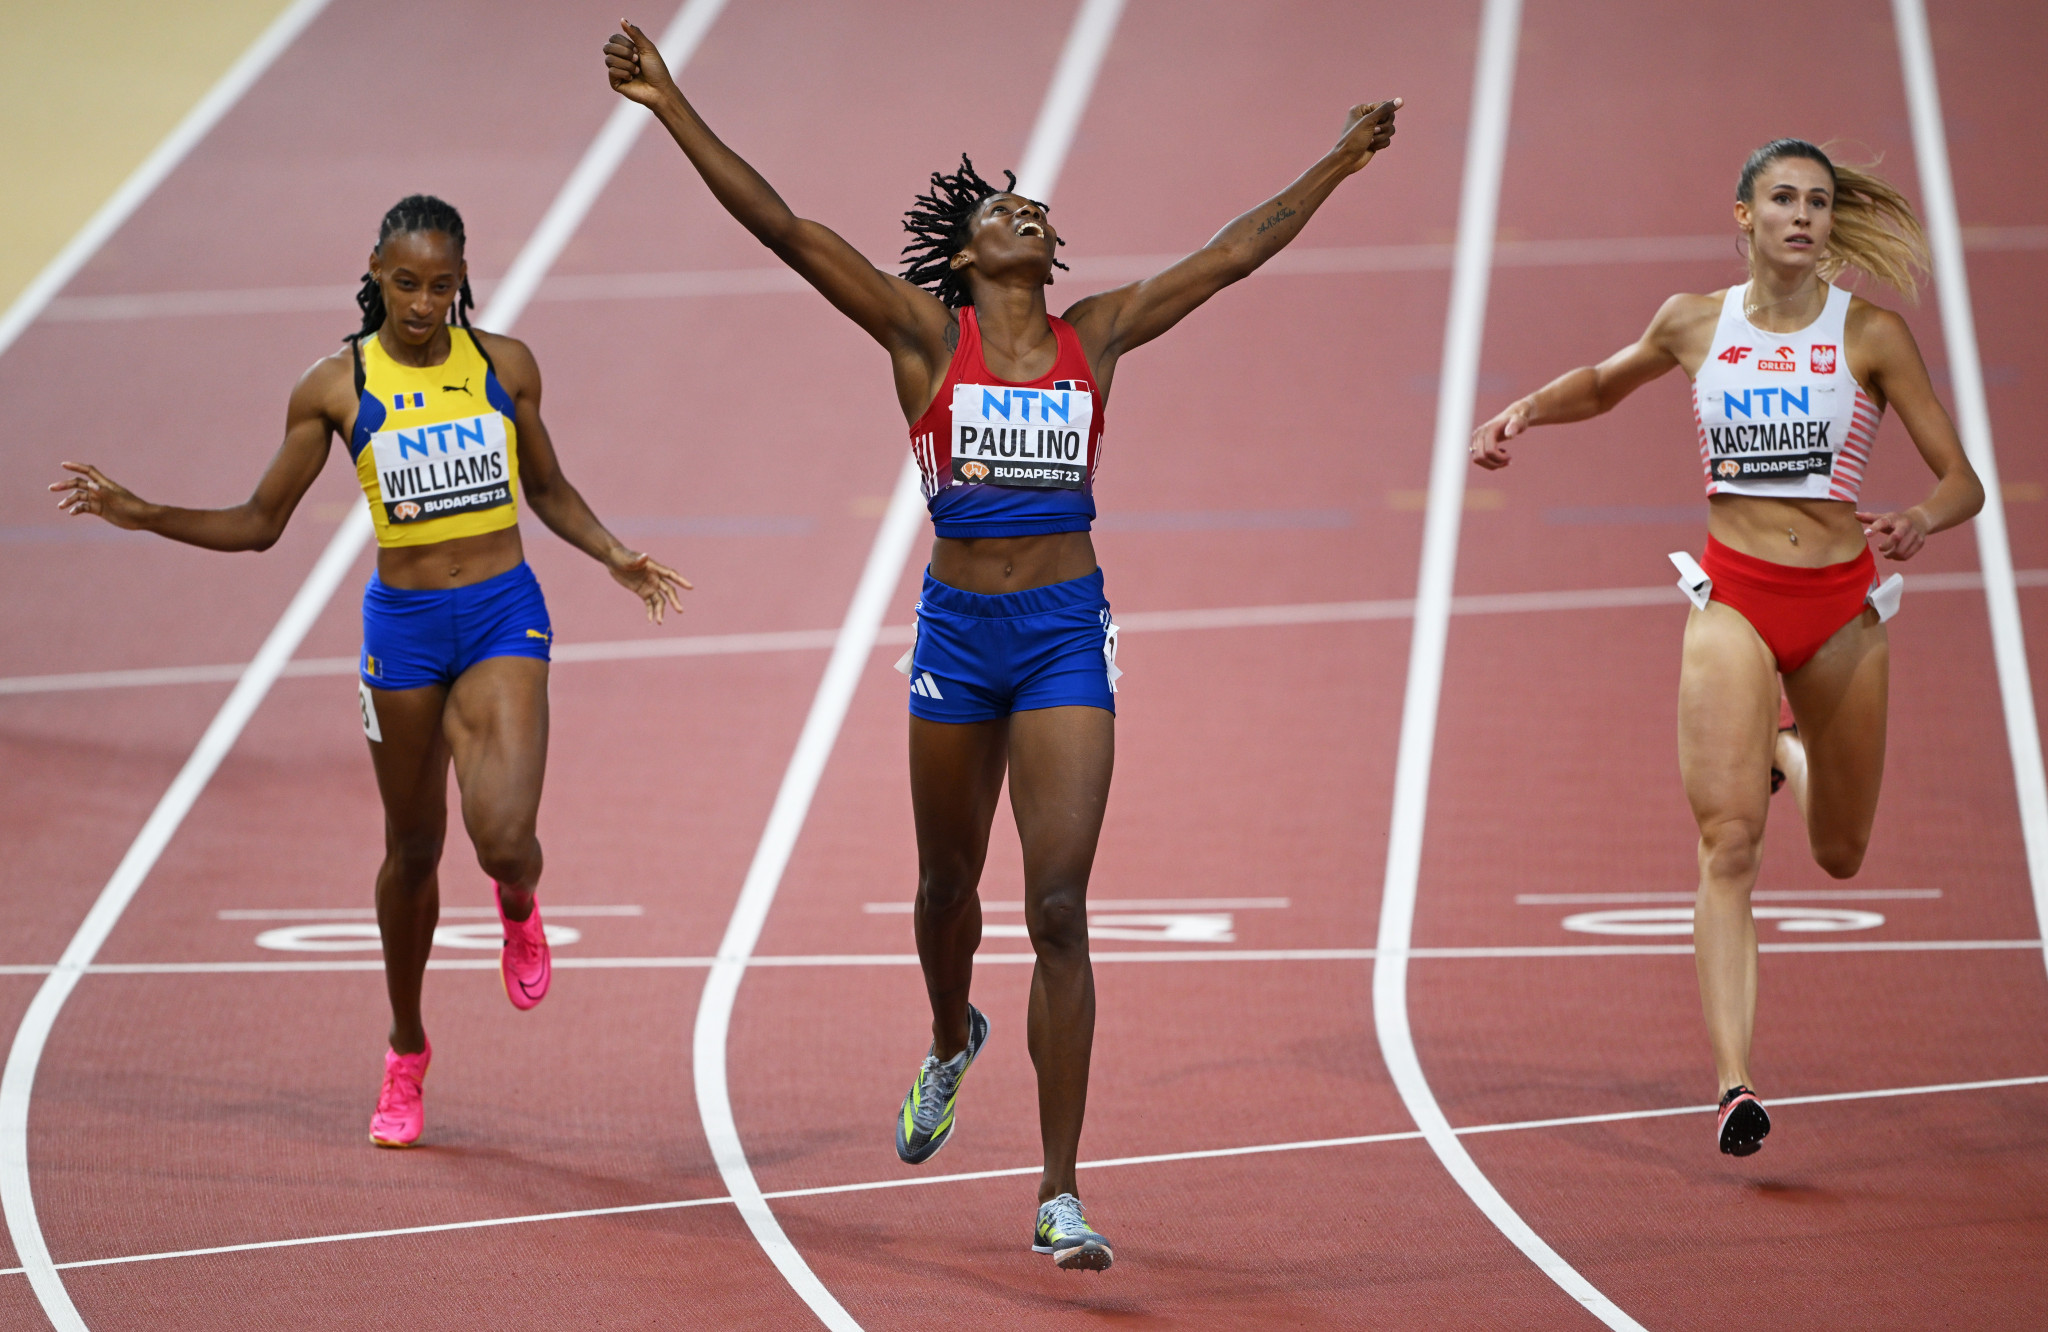 Dominican Republic's Marileidy Paulino, centre, claimed a dominant victory in the women's 400m final ©Getty Images